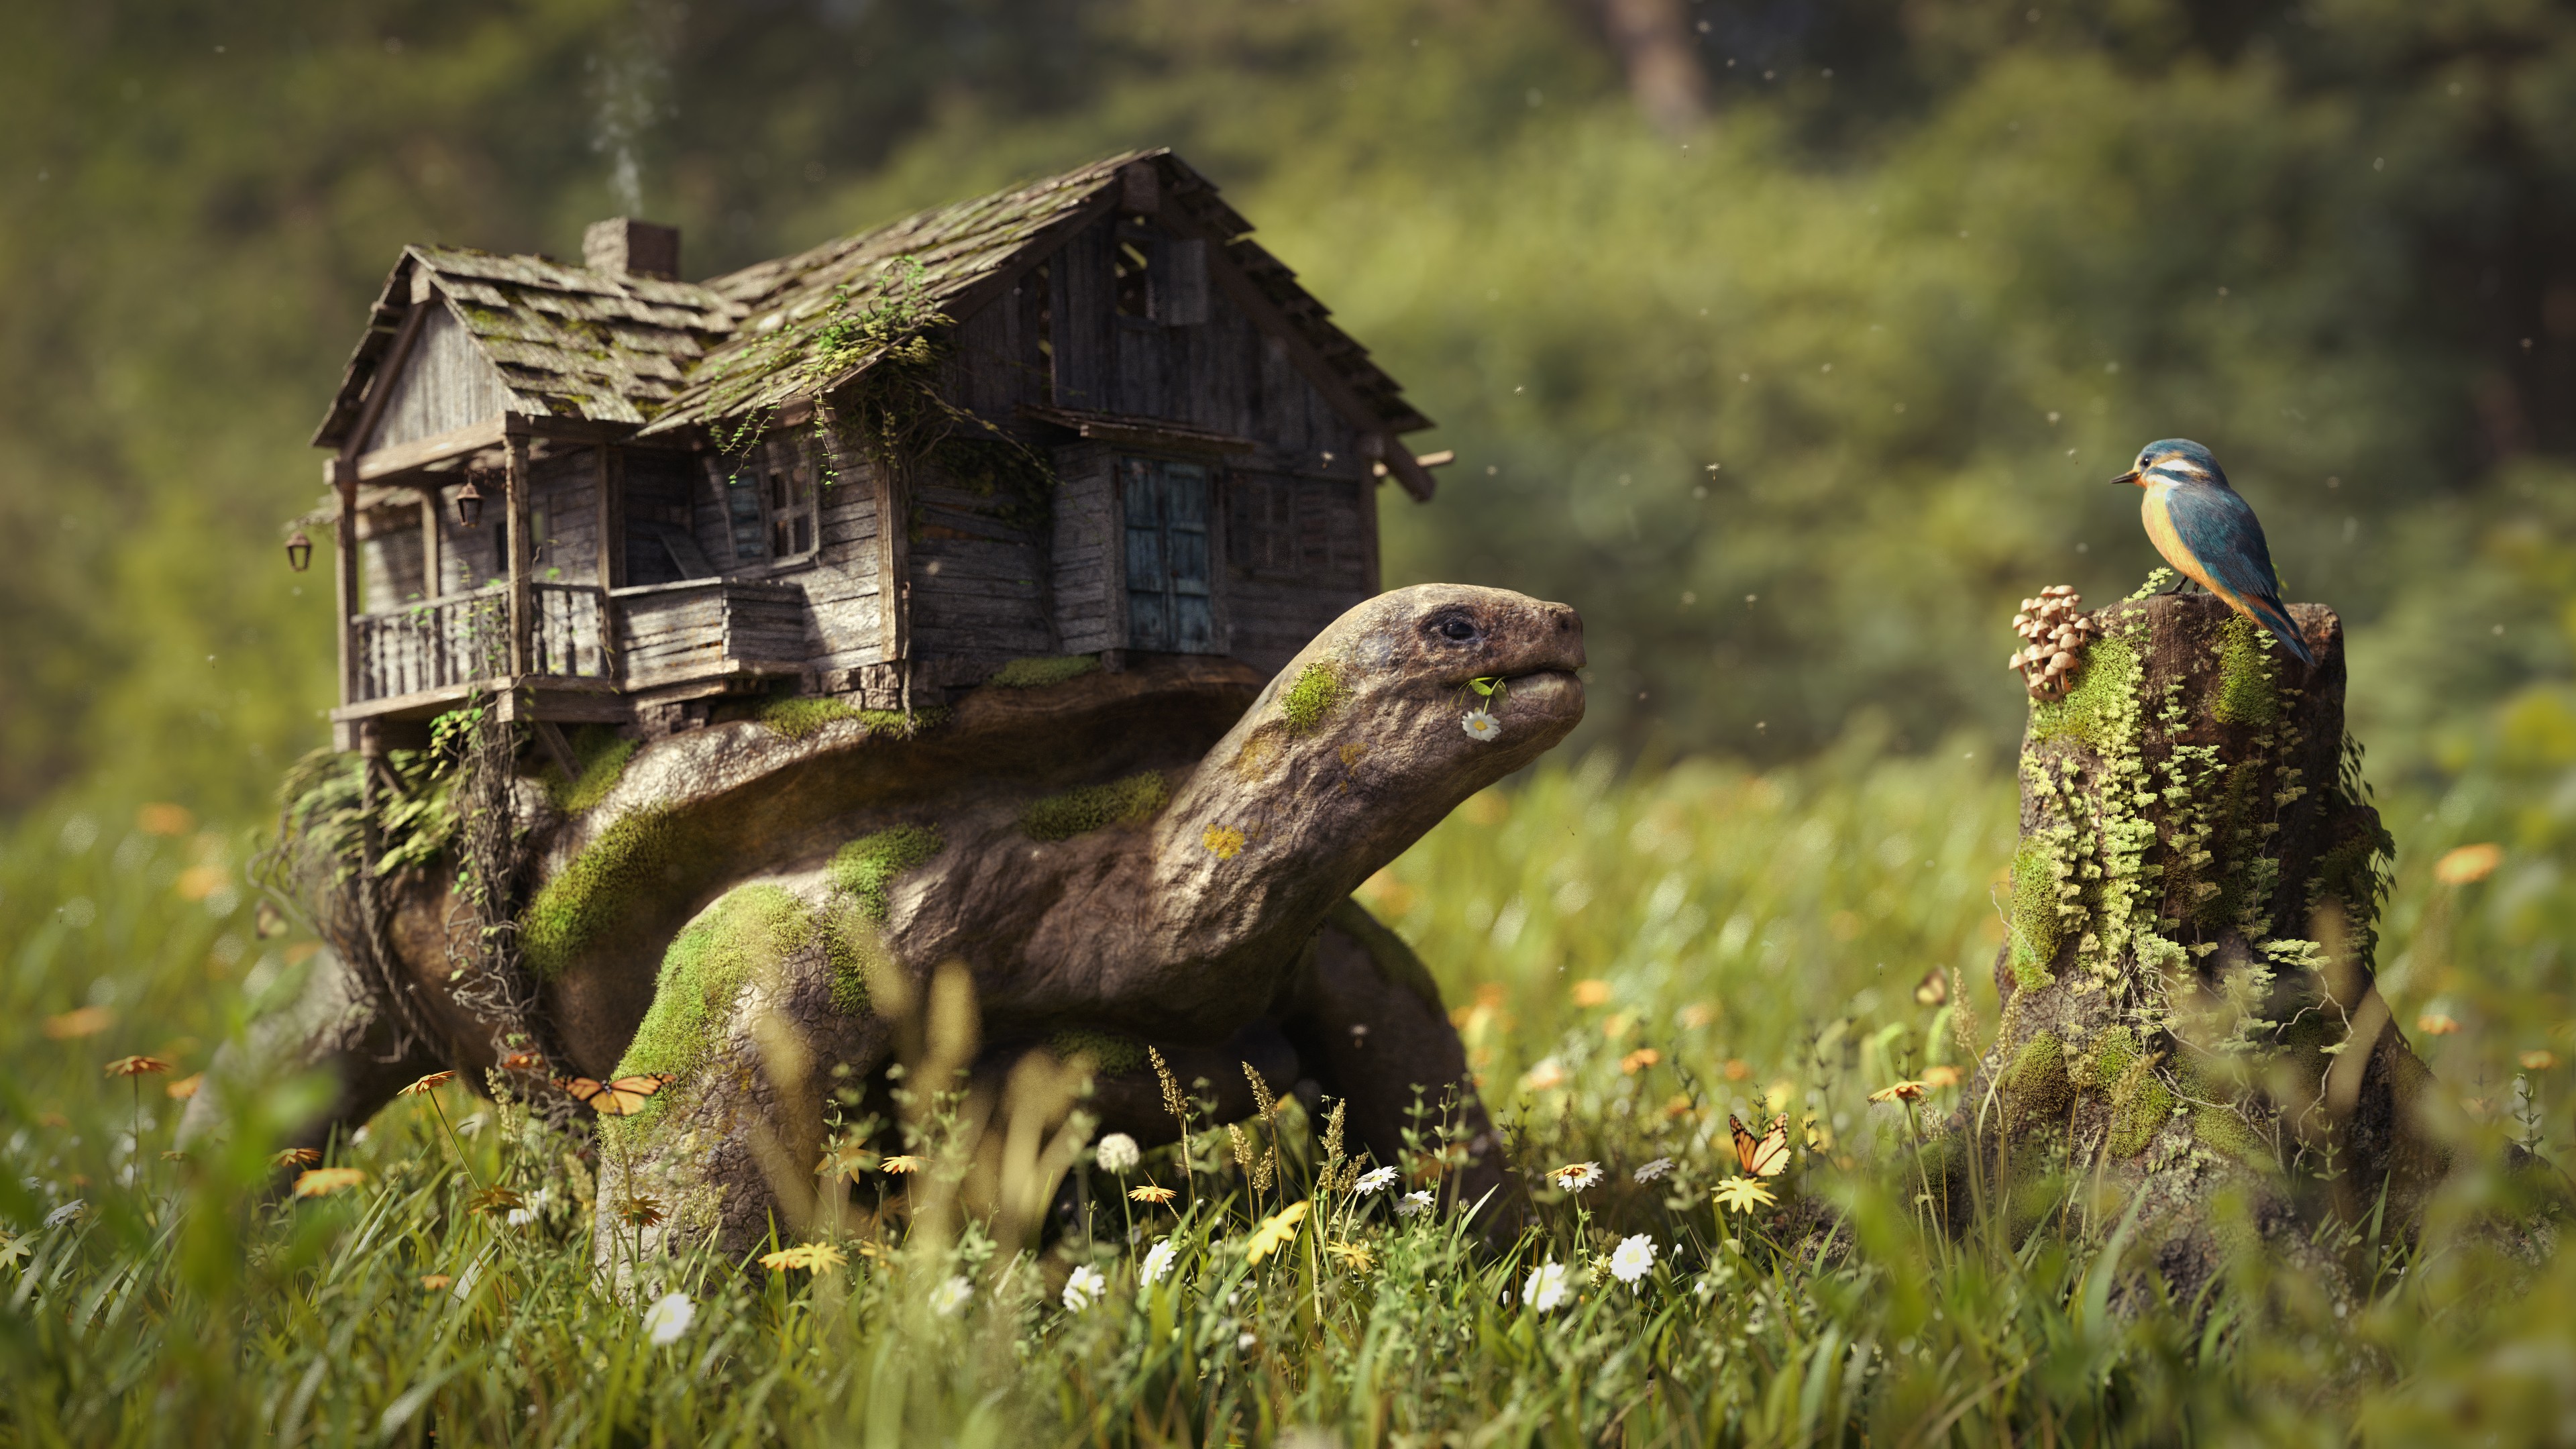 General 3840x2160 digital art animals photography photoshopped nature grass field birds turtle flowers moss trees butterfly house depth of field artwork old log tree stump green brown fantasy art